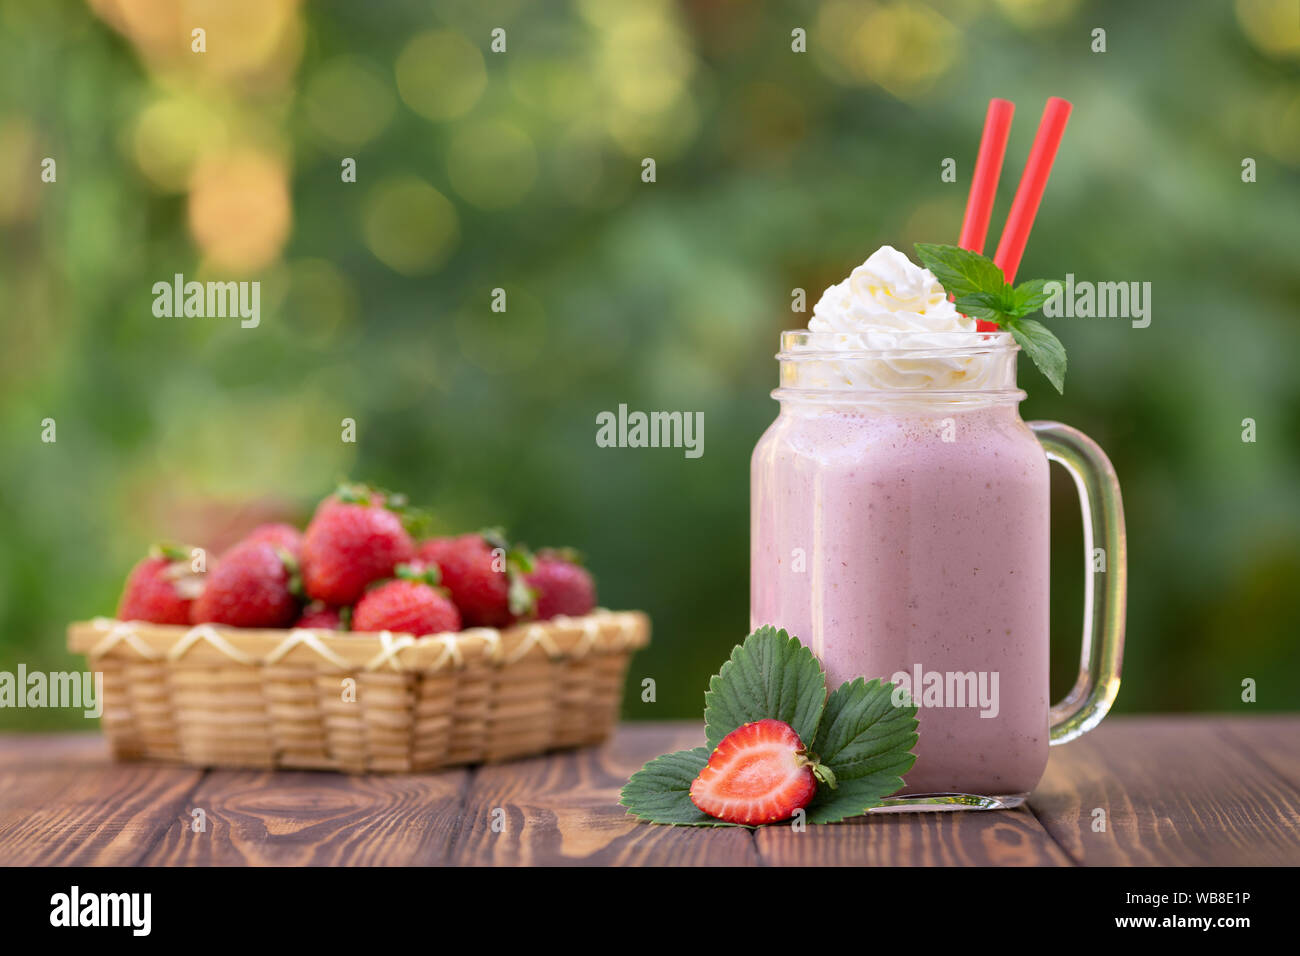 strawberry milkshake in mason jar with whipped cream and fresh ripe berries in basket on wooden table outdoors Stock Photo